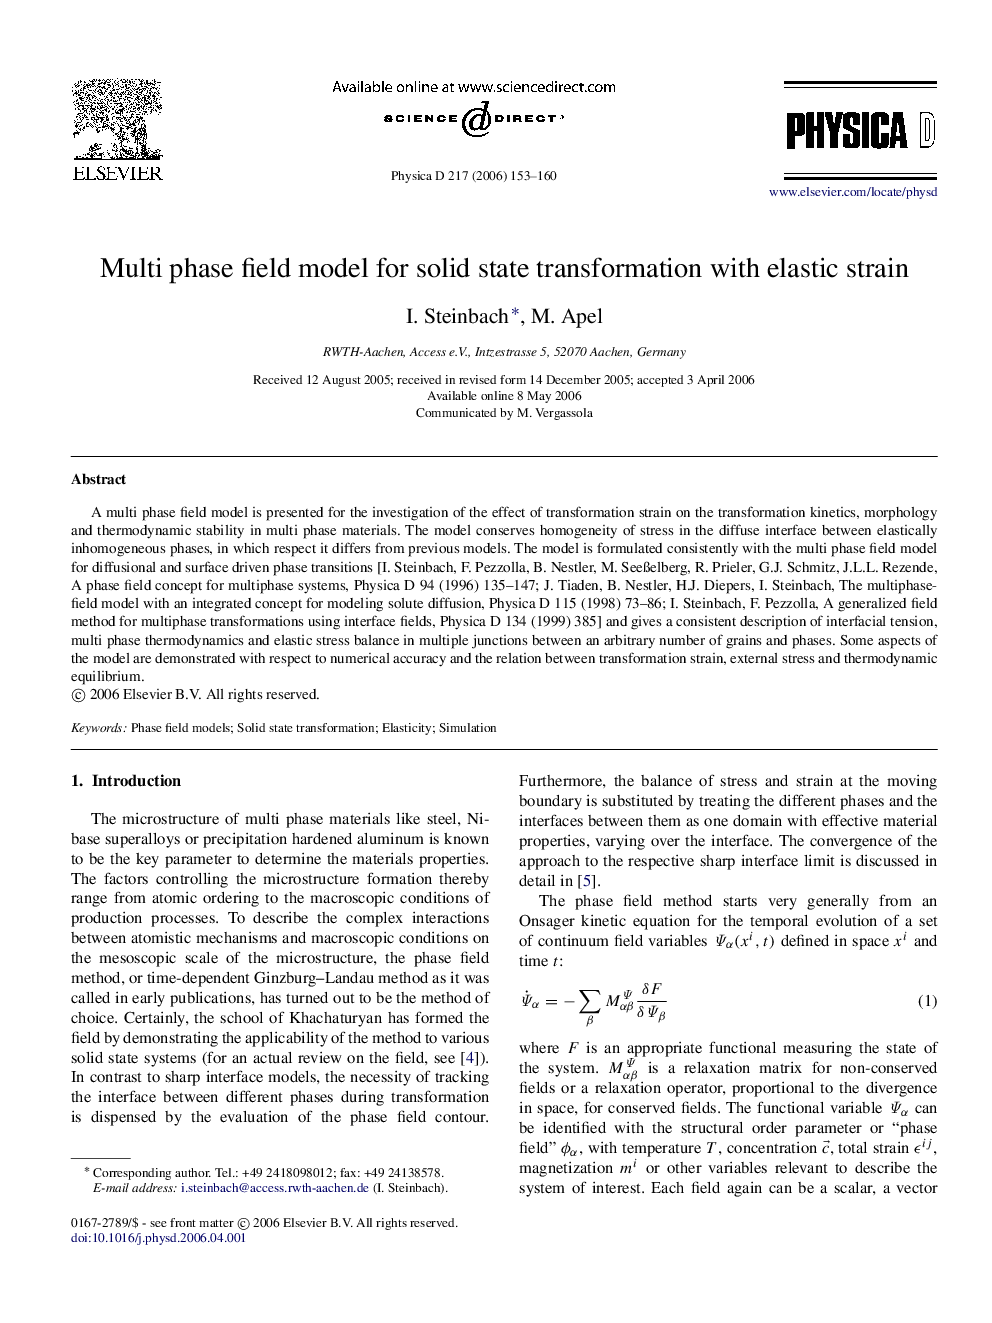 Multi phase field model for solid state transformation with elastic strain